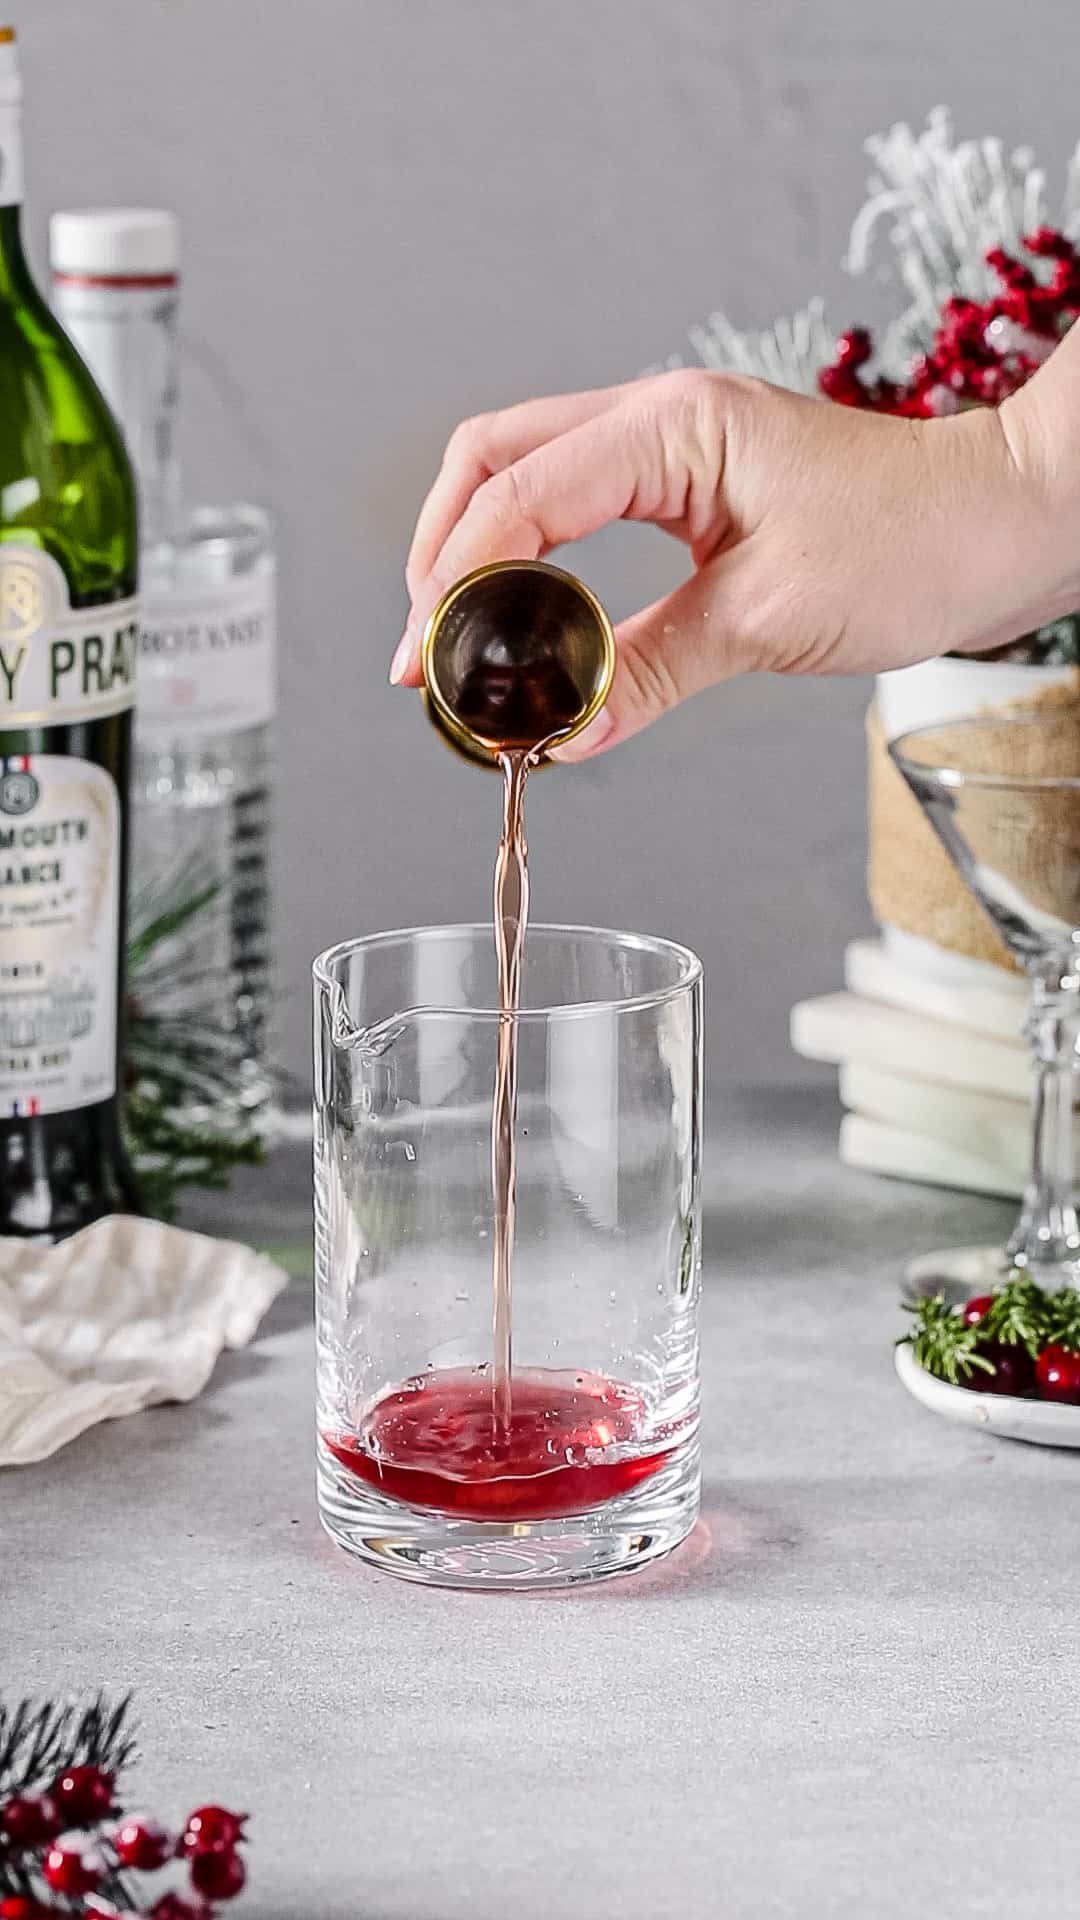 Hand pouring spiced cranberry syrup into a cocktail mixing glass.